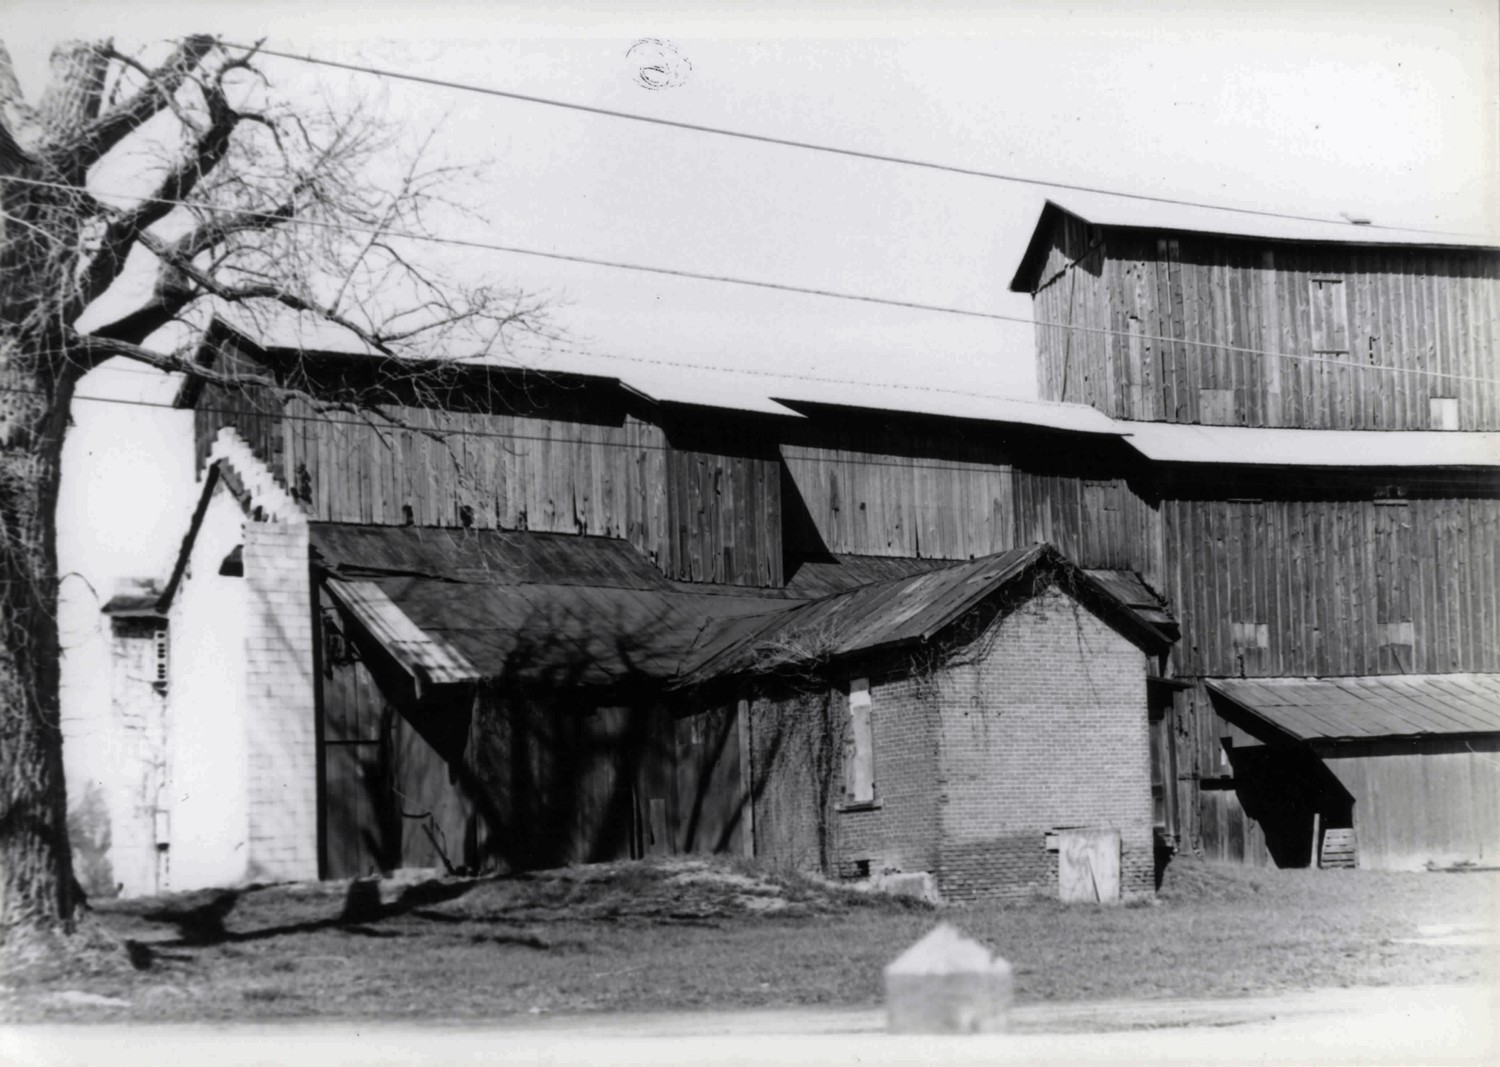 O.P. Chaney Grain Elevator, Canal Winchester Ohio West section, South elevation (1987)